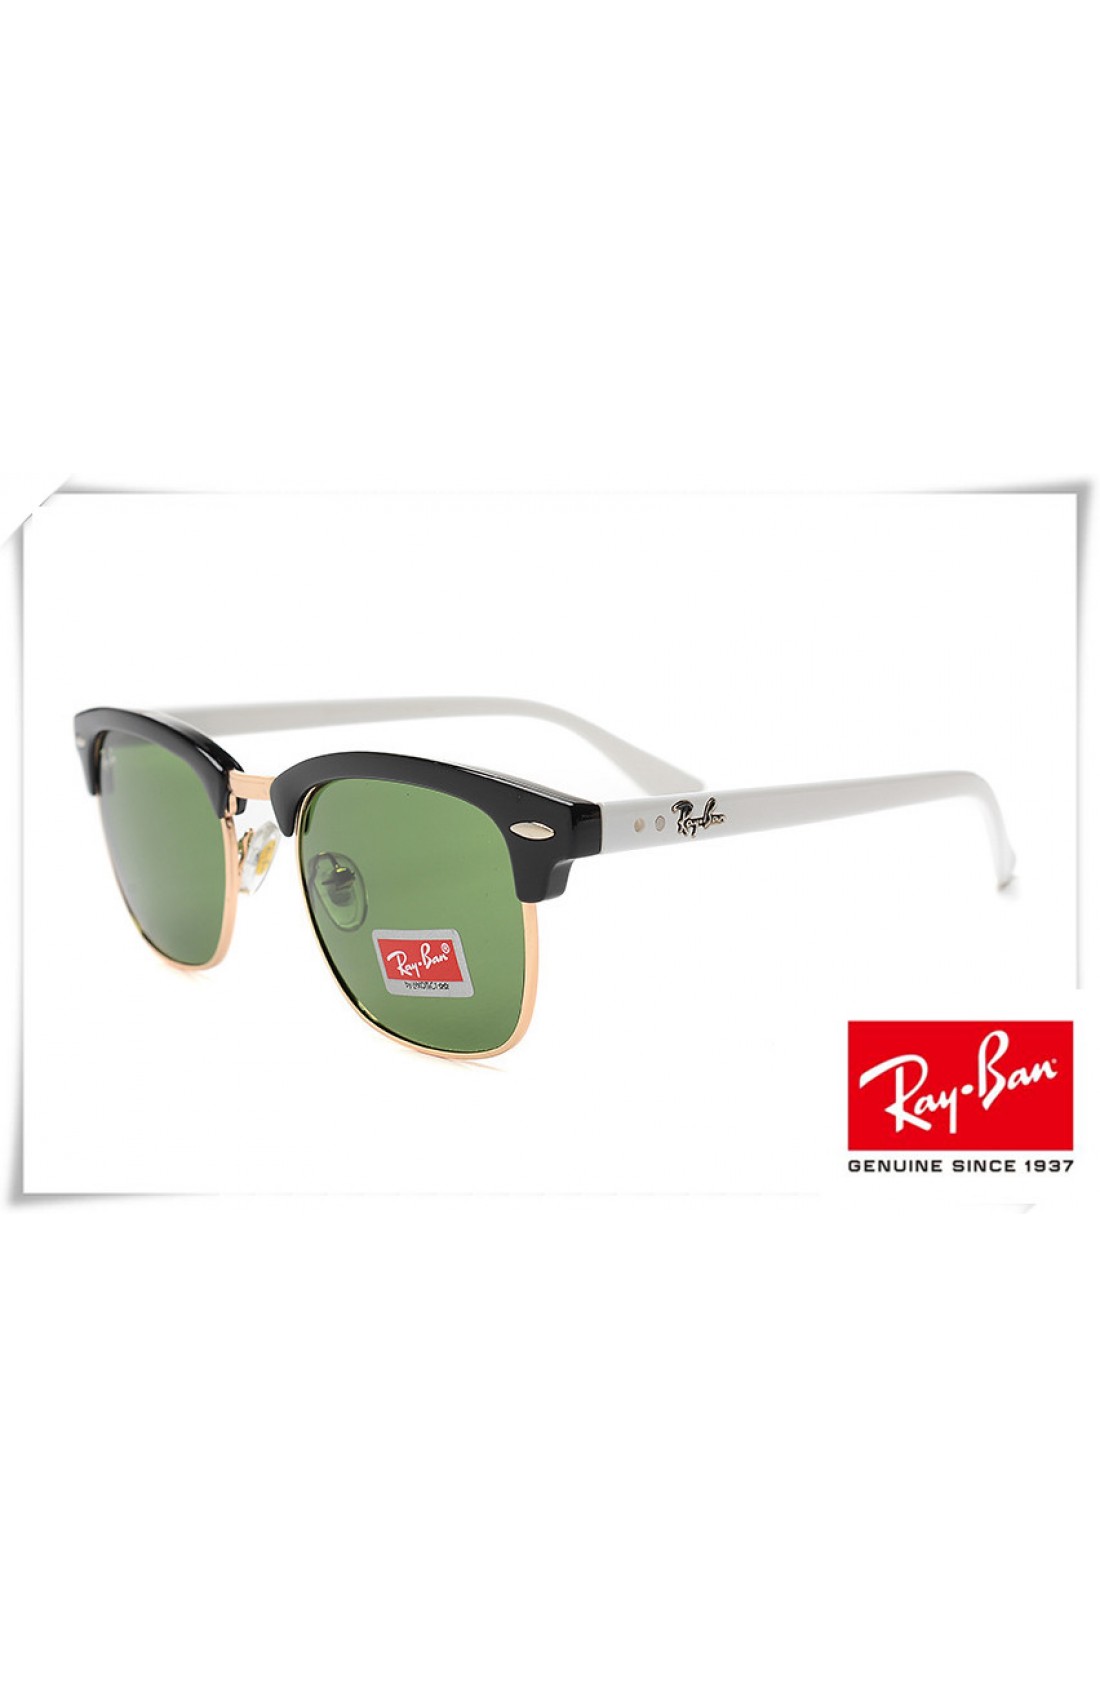 ray ban classic clubmaster sunglasses